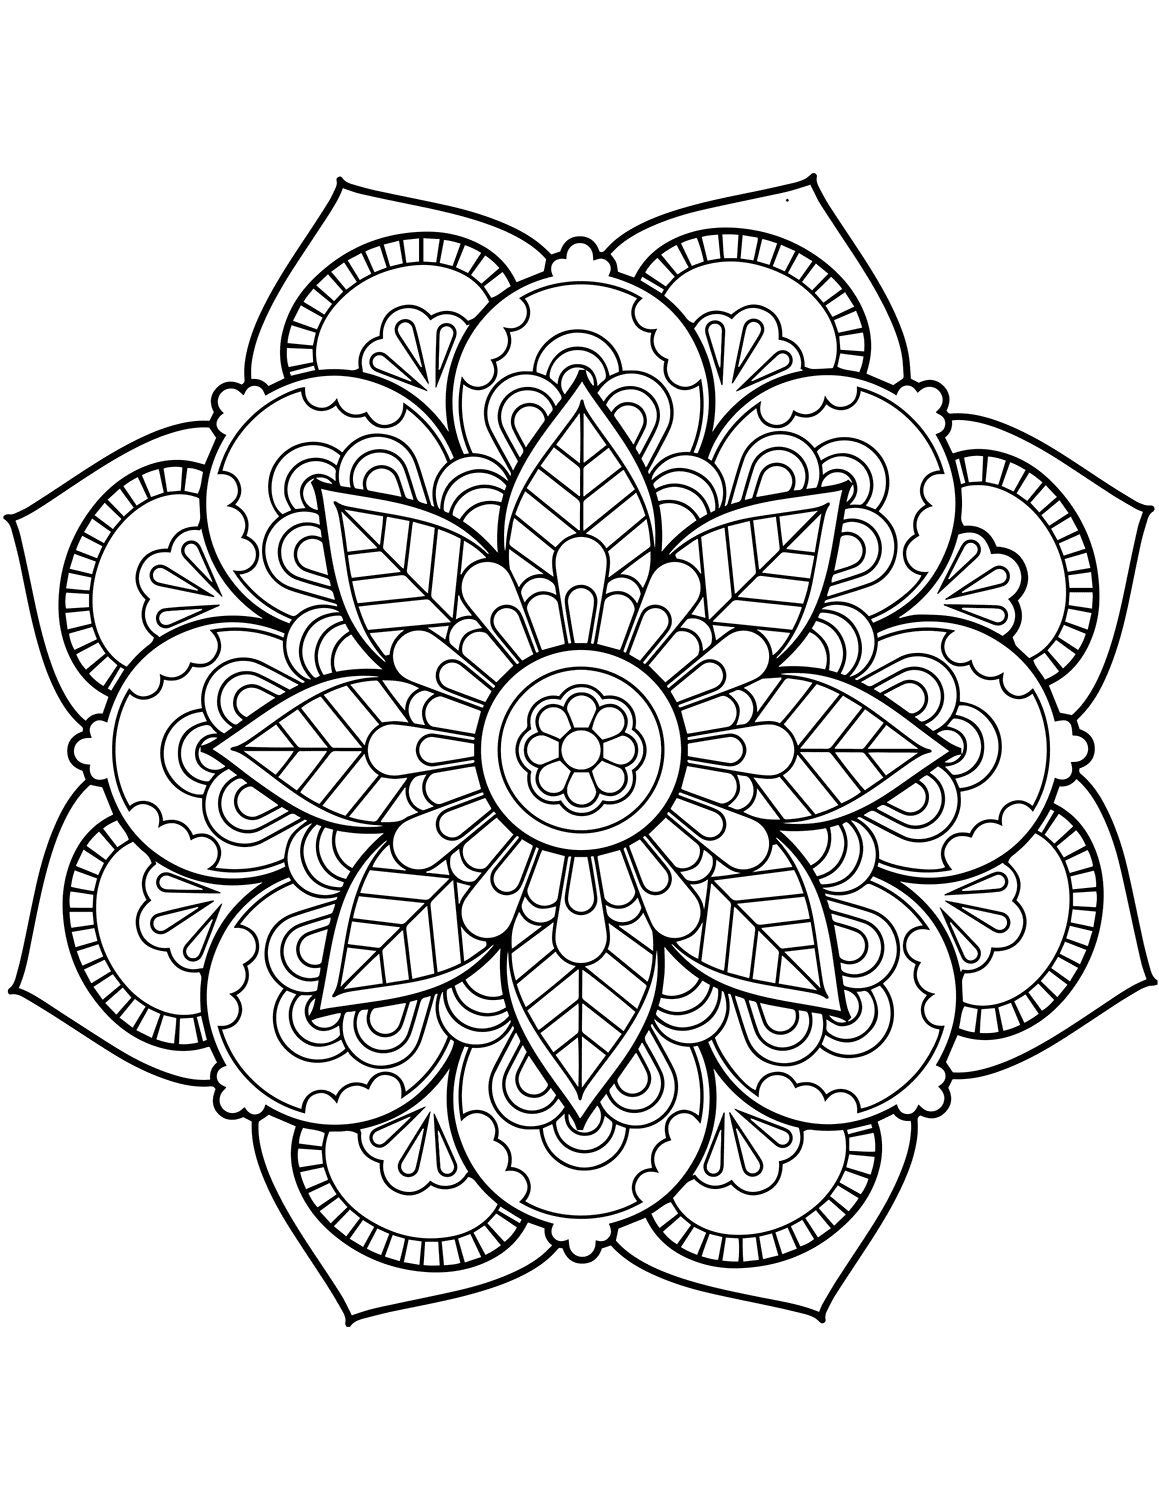 Mandalas For Adults Coloring Pages - Coloring Home